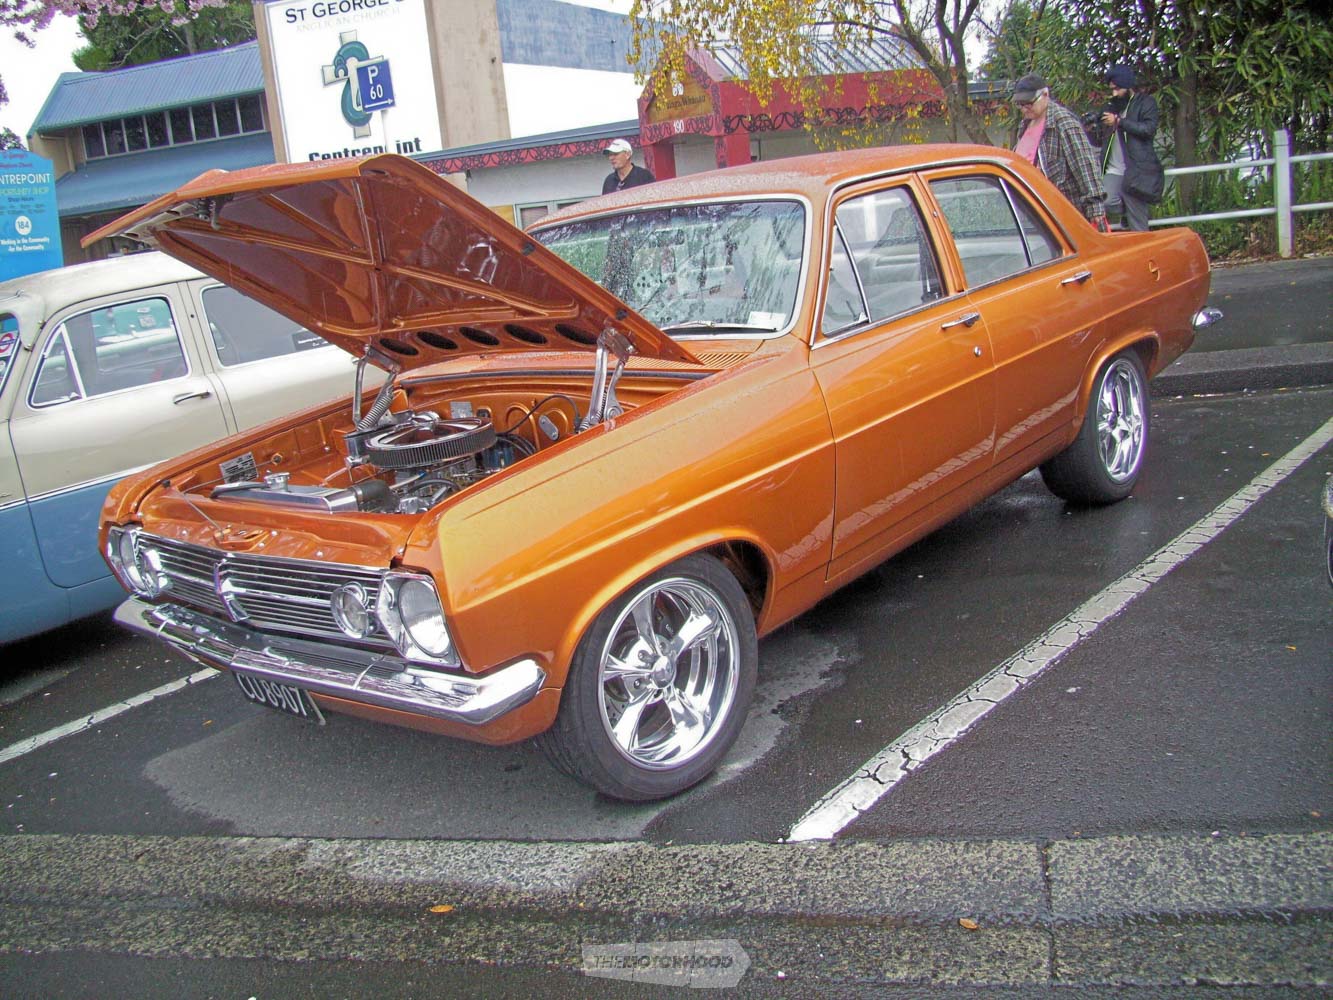 Joe Ryder  from Bethlehem had his golden 1966 HR Holden on display  but I had no other info on it.jpg